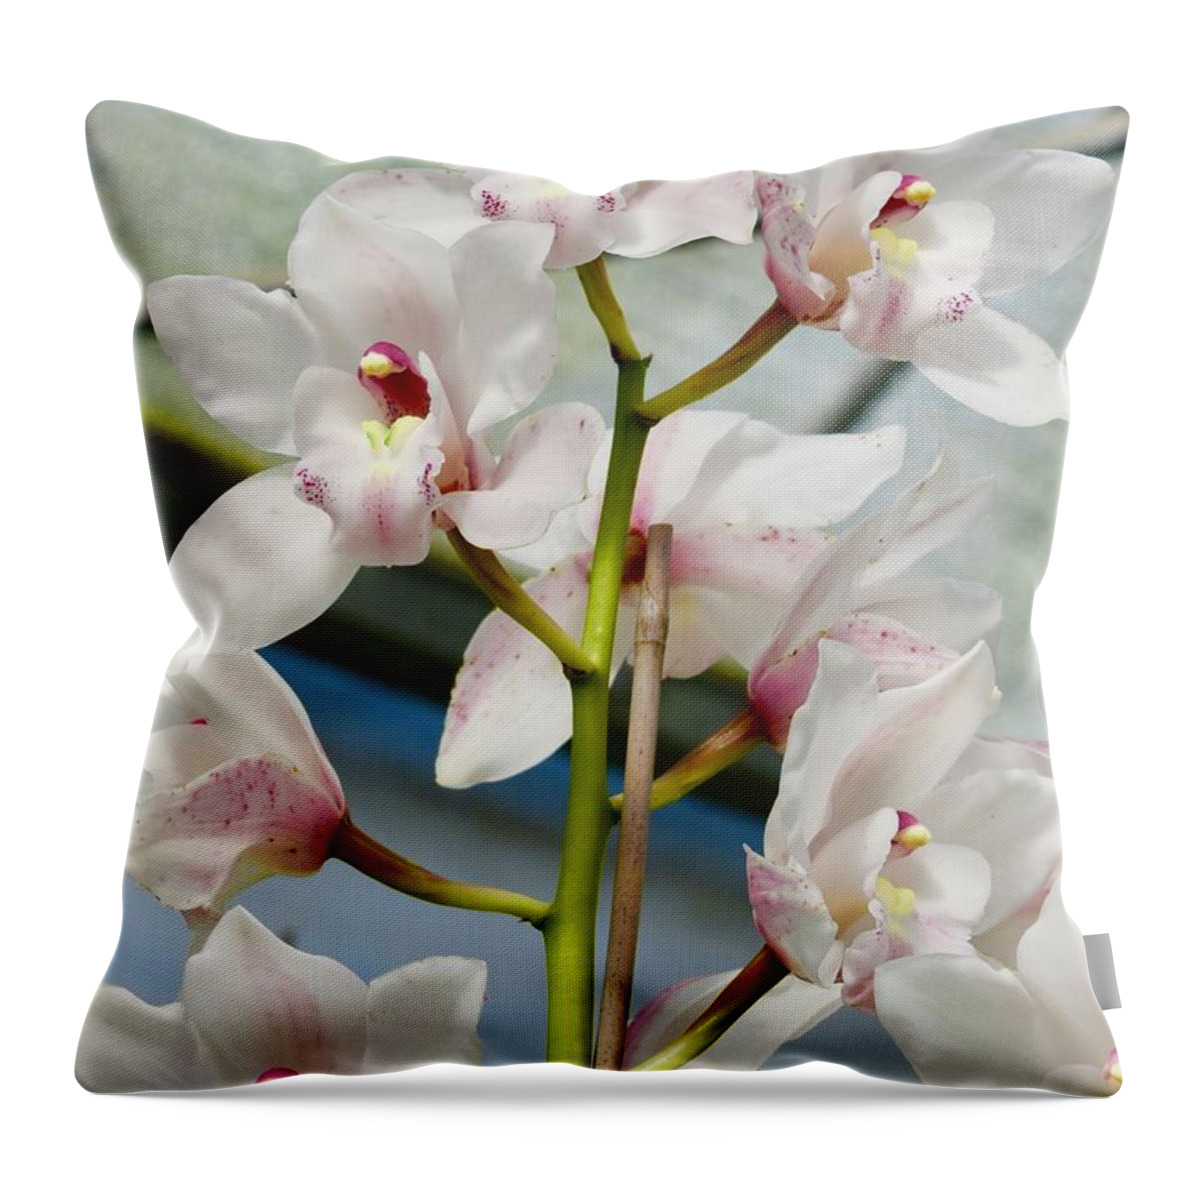 Flower Throw Pillow featuring the photograph White Cymbidium Orchids I by Bnte Creations